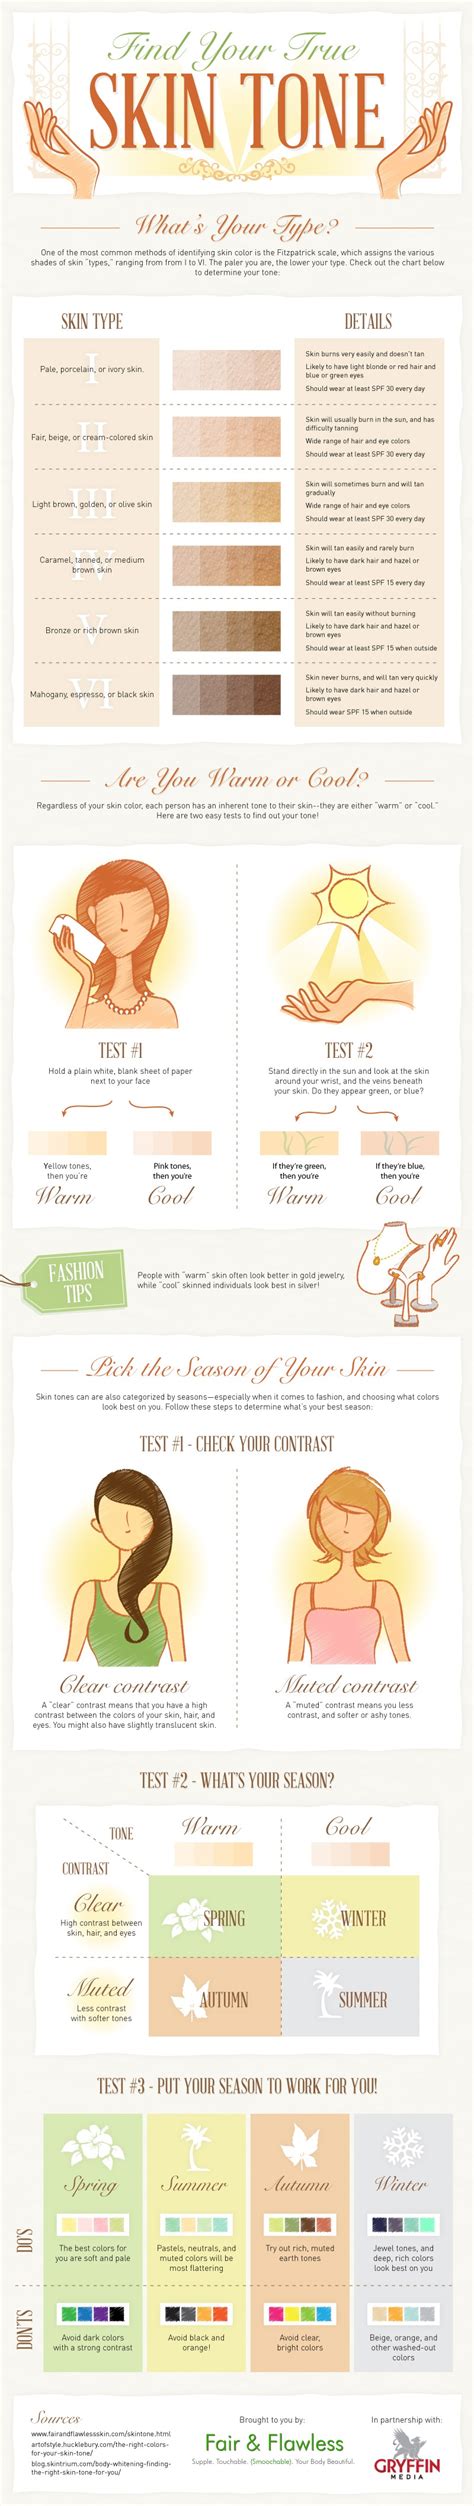 How do i pick the right skin tone? Find Your True Skin Tone - Lucy Jayne Makeup